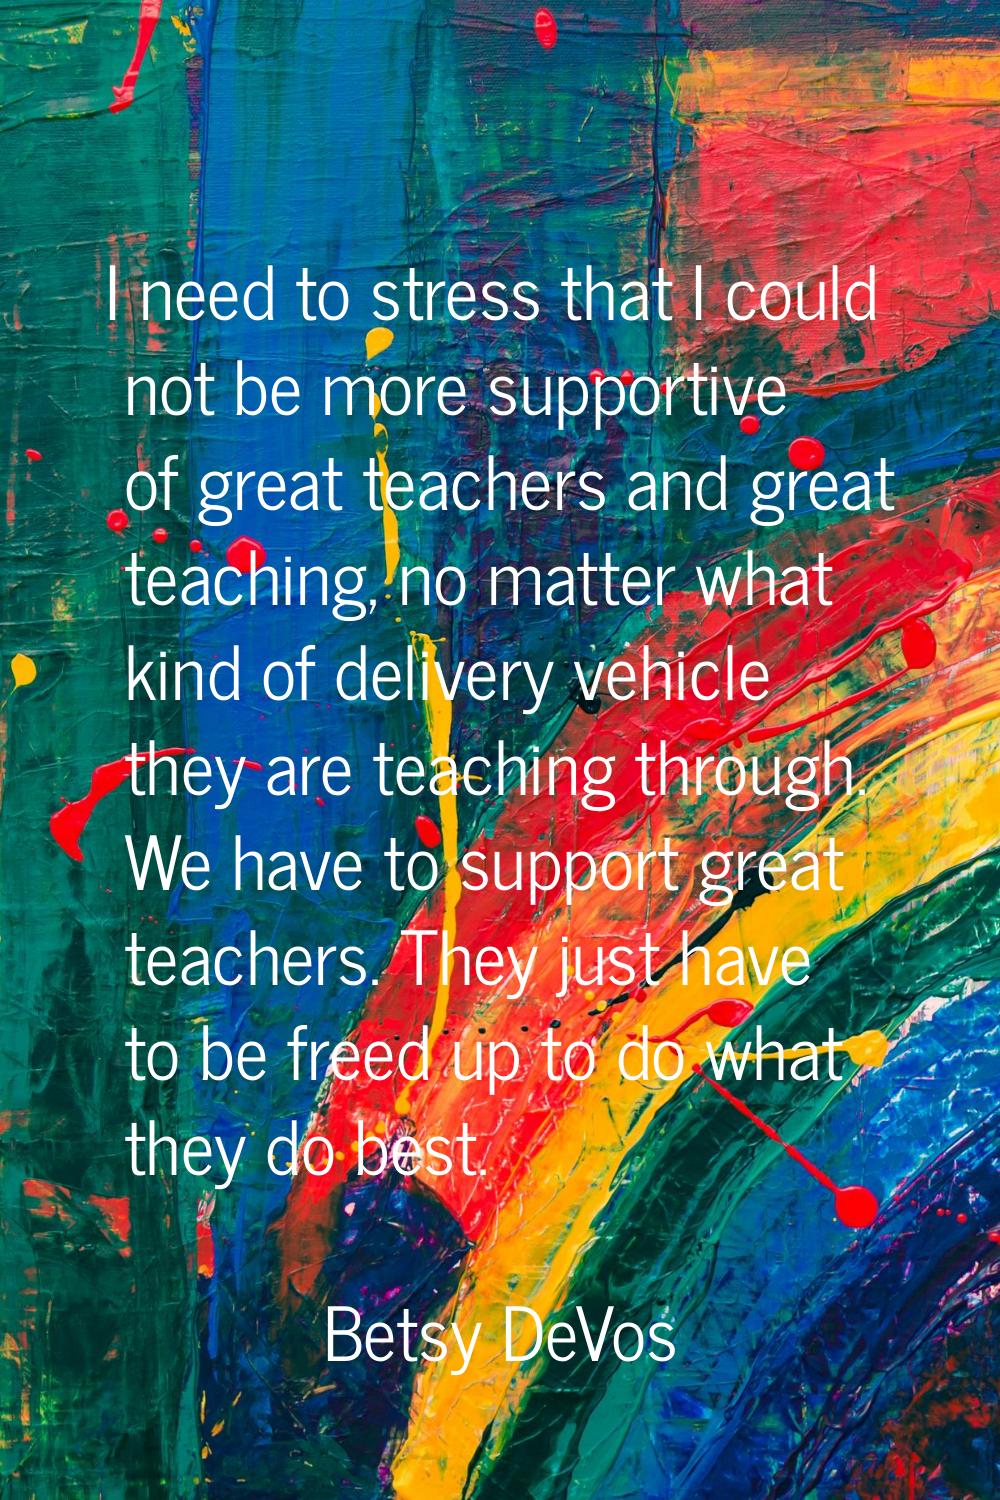 I need to stress that I could not be more supportive of great teachers and great teaching, no matte